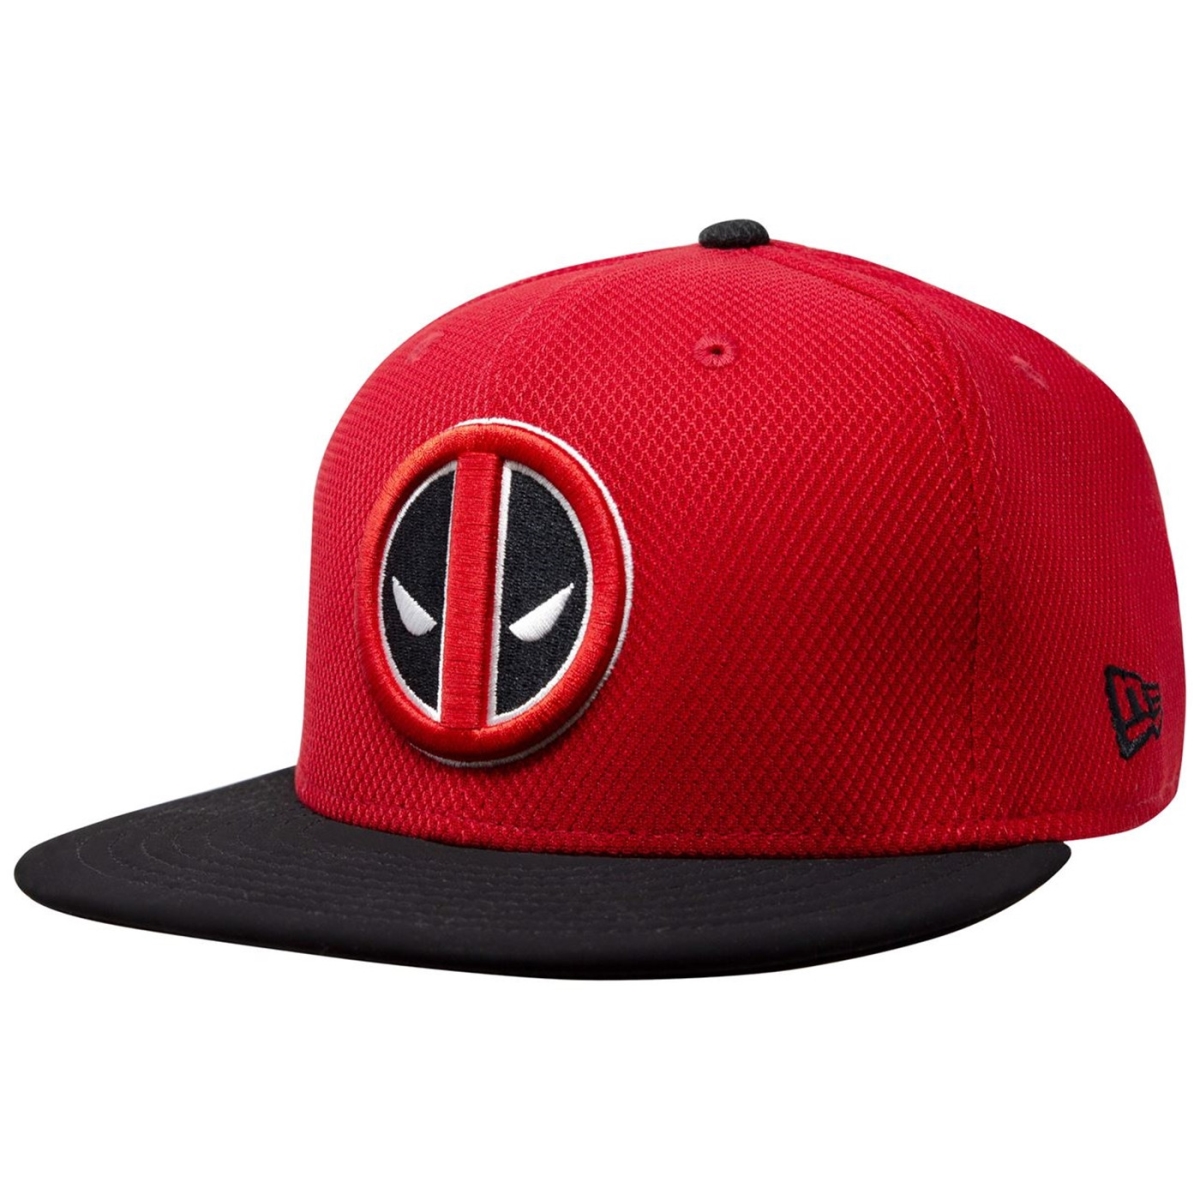 Picture of Deadpool hatdpsymrb5950-714-7 1-4 Fitted Deadpool Symbol Red & Black 59Fifty Fitted Hat - Size 7.25